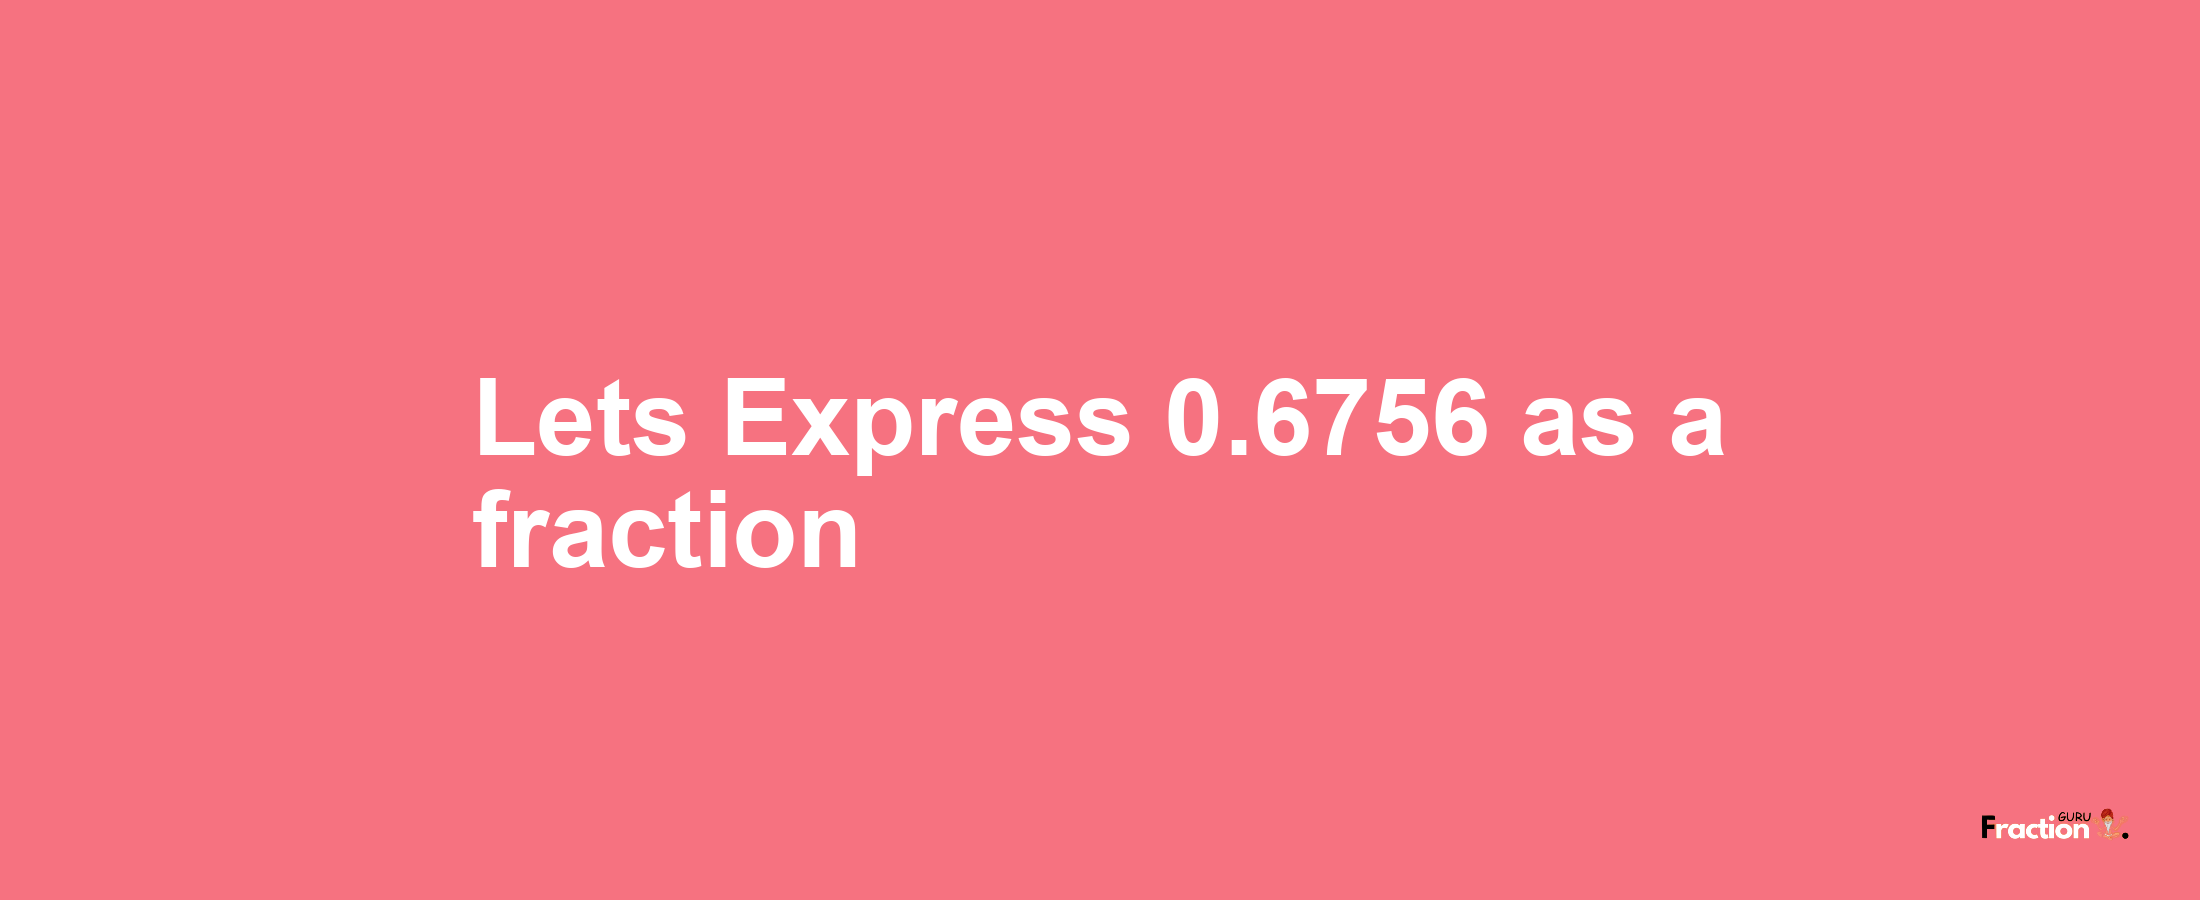 Lets Express 0.6756 as afraction